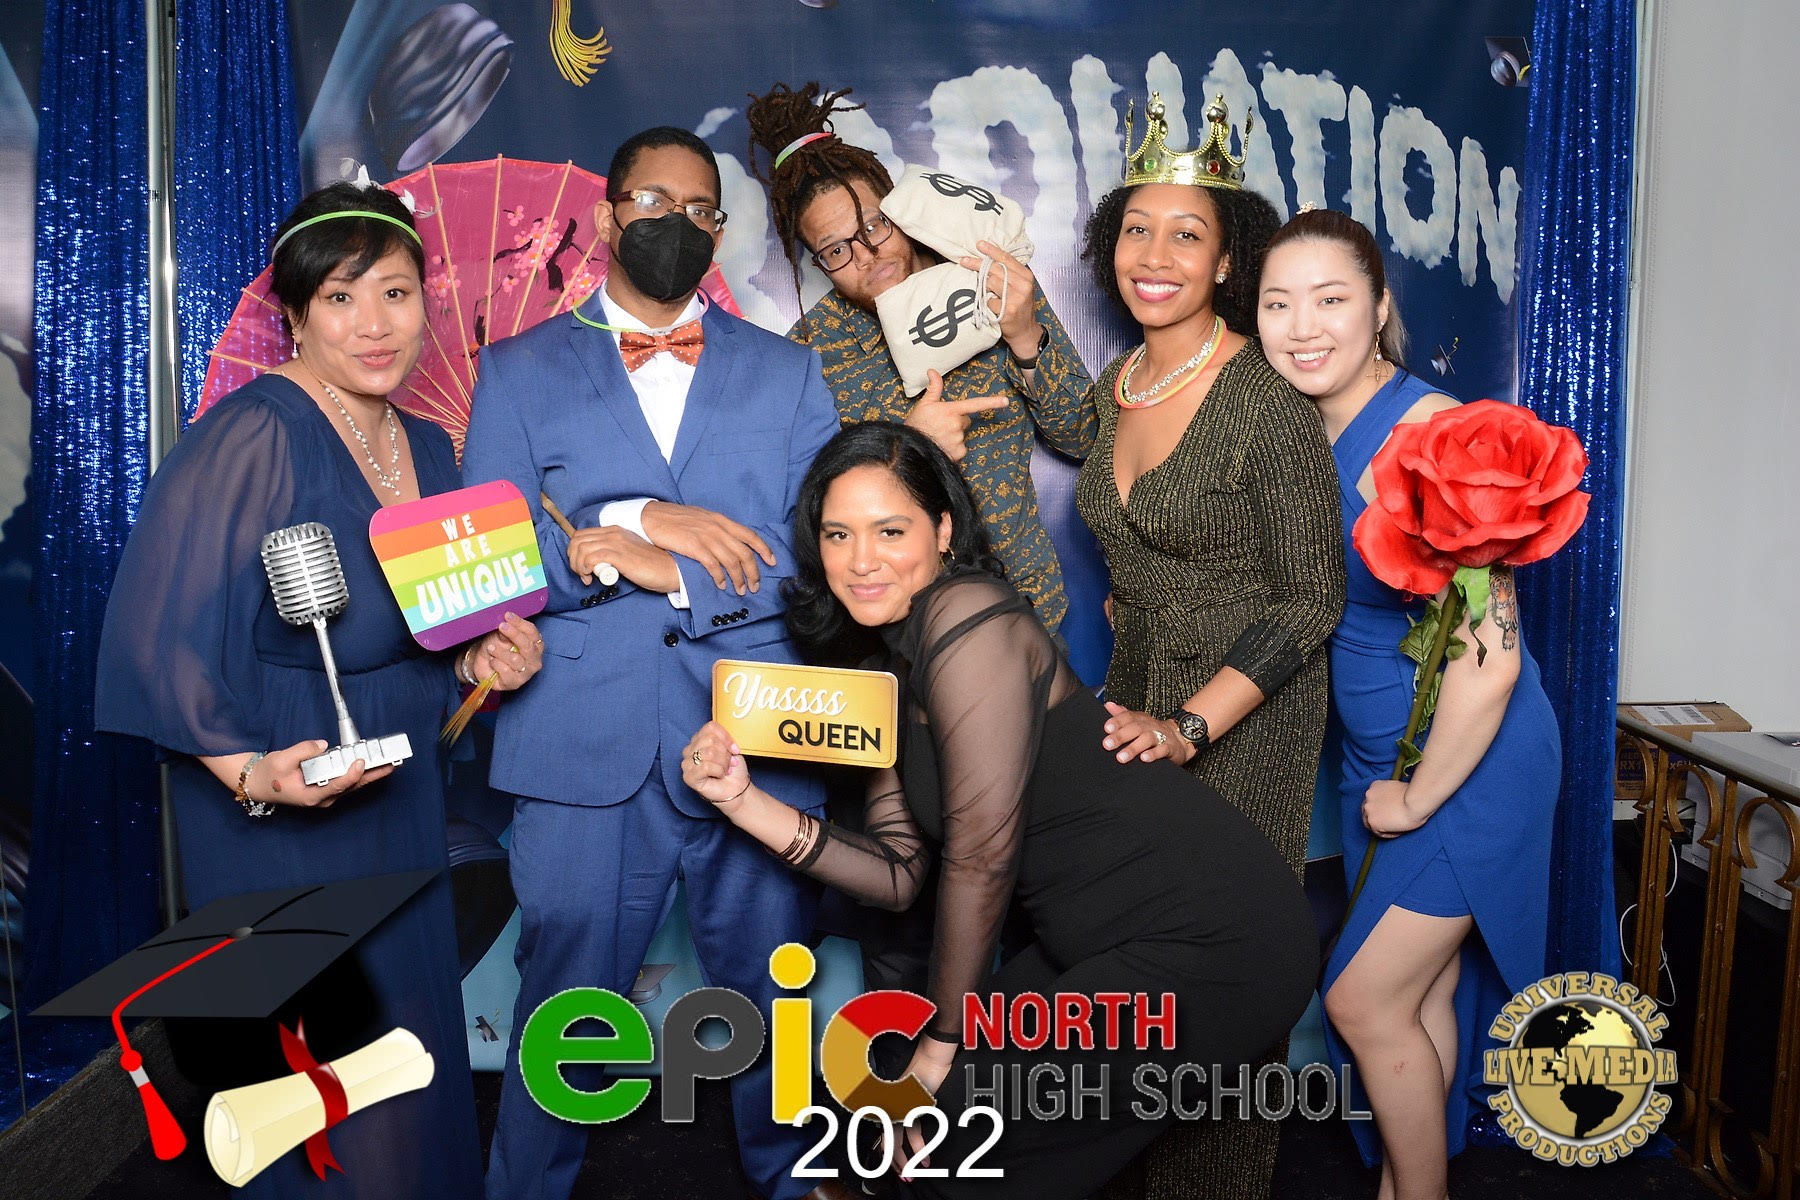 6 EPIC staff members (Vicky, Spellman, Fields, Darlene, Ms. A, and Ms. Lee) posing at together and holding up signs at 2022 Senior prom